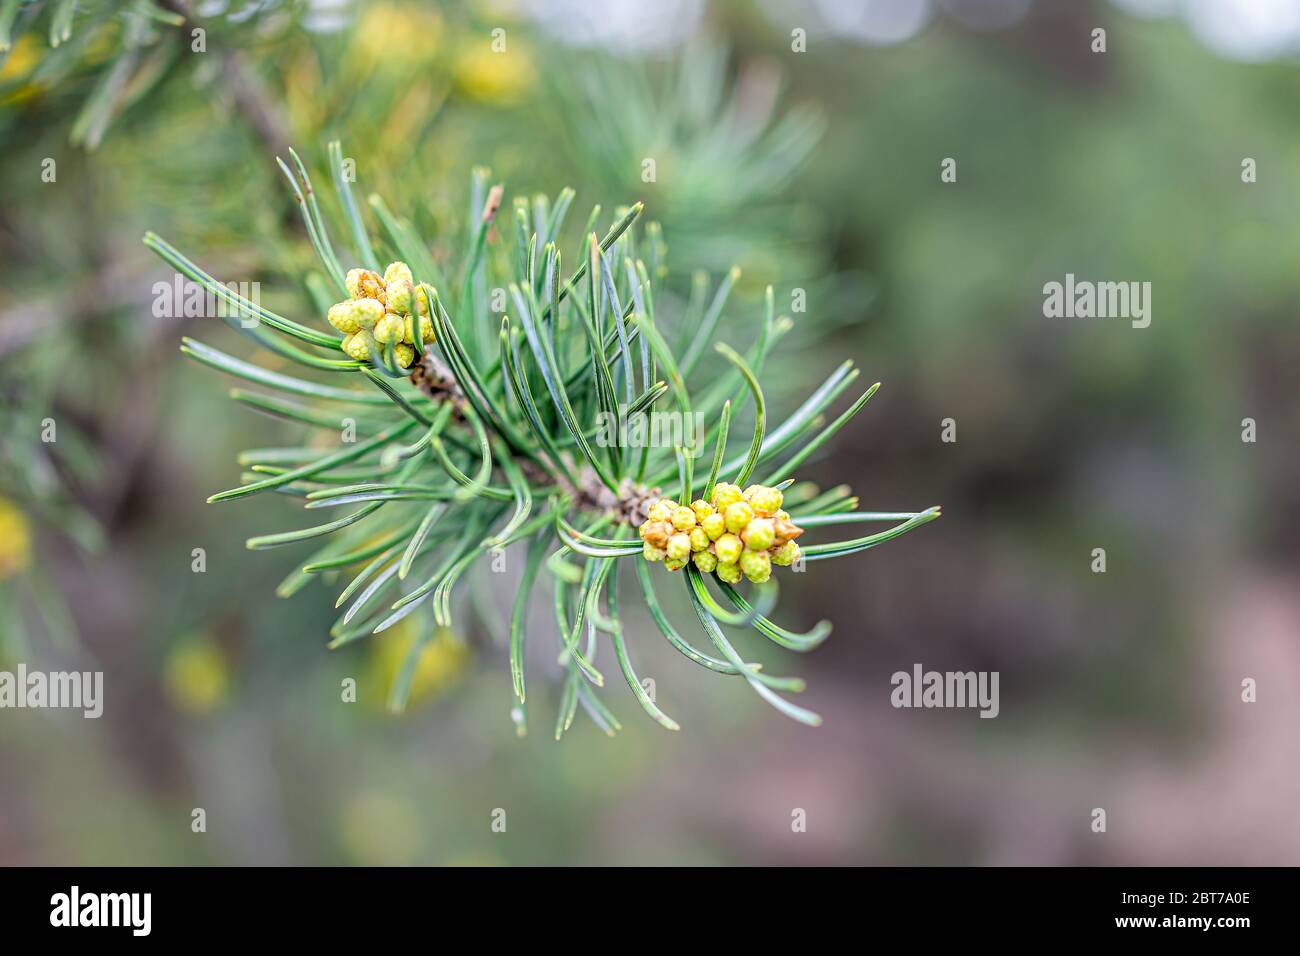 Macro closeup of pine cones pollen and needles on tree branch with forest in blurry blurred background Stock Photo